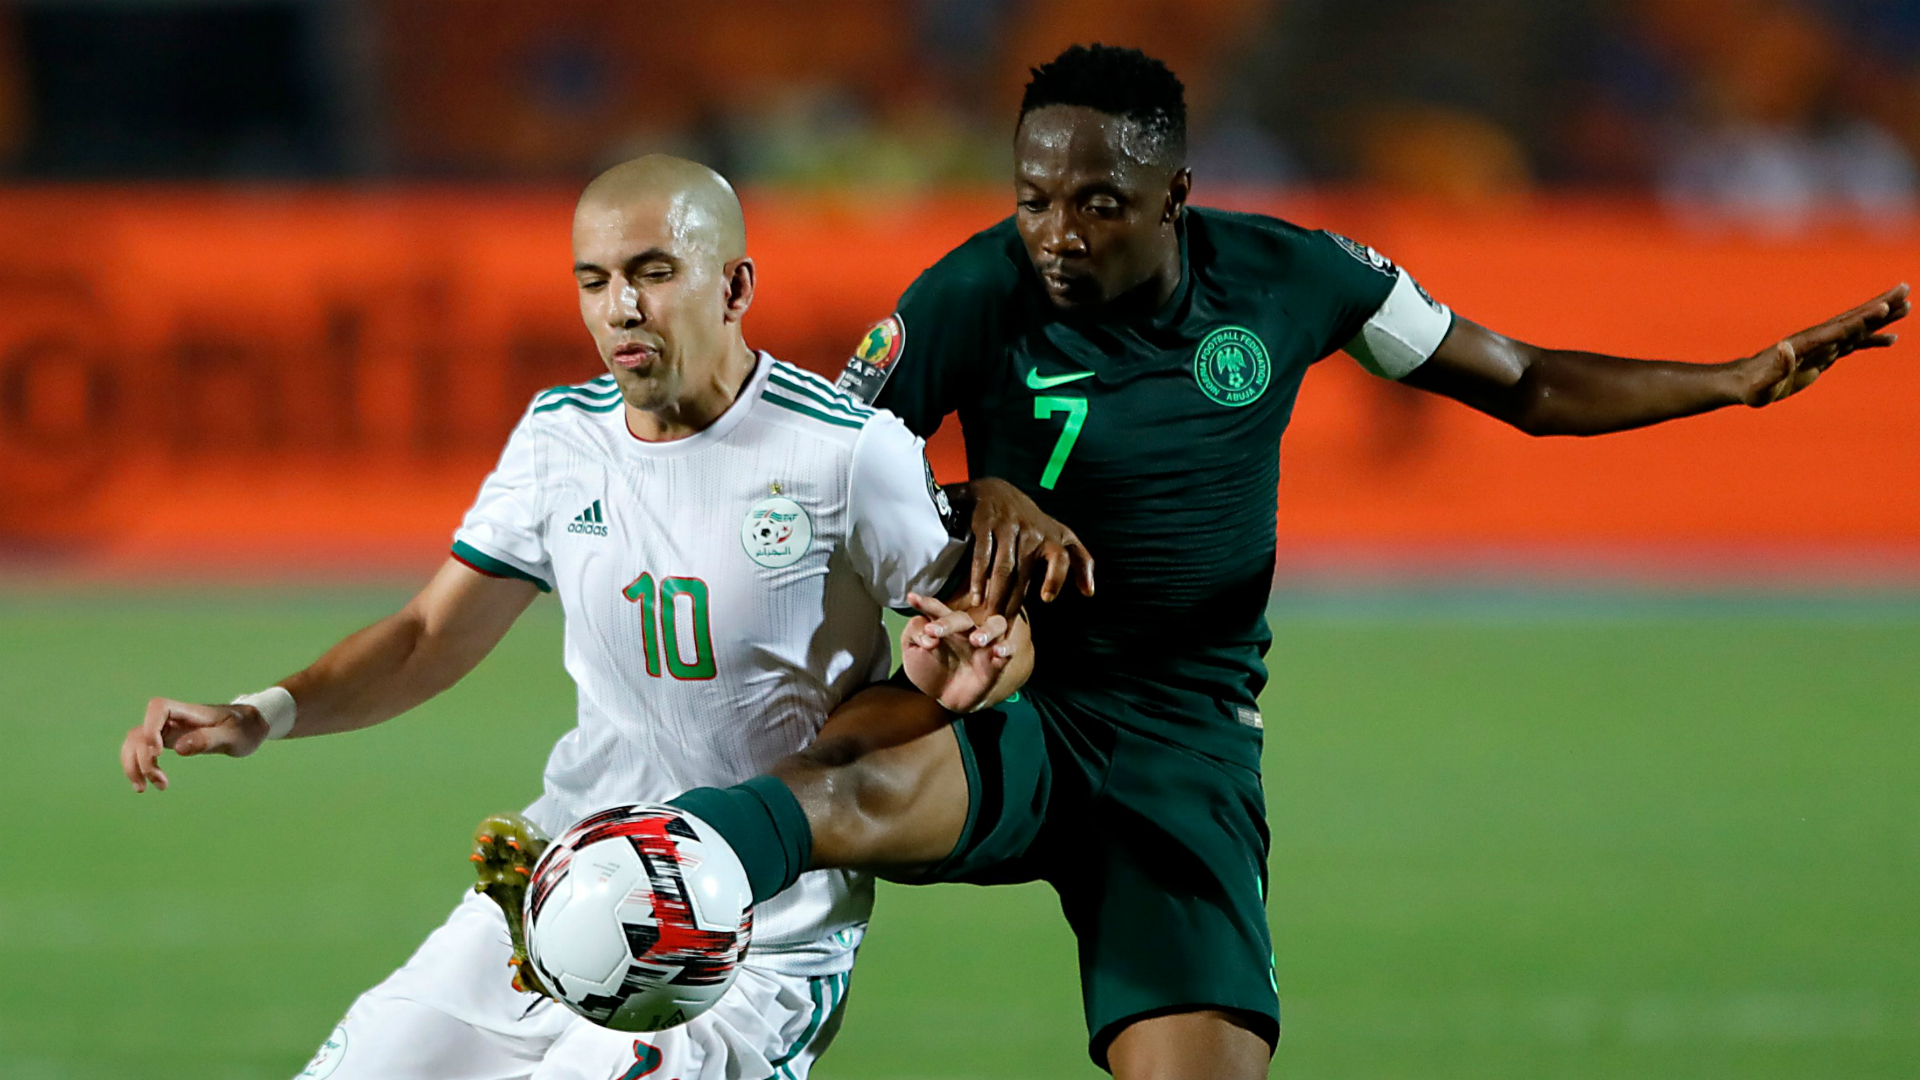 Algeria named as Nigeria's opponent after Cote d'Ivoire withdrawal